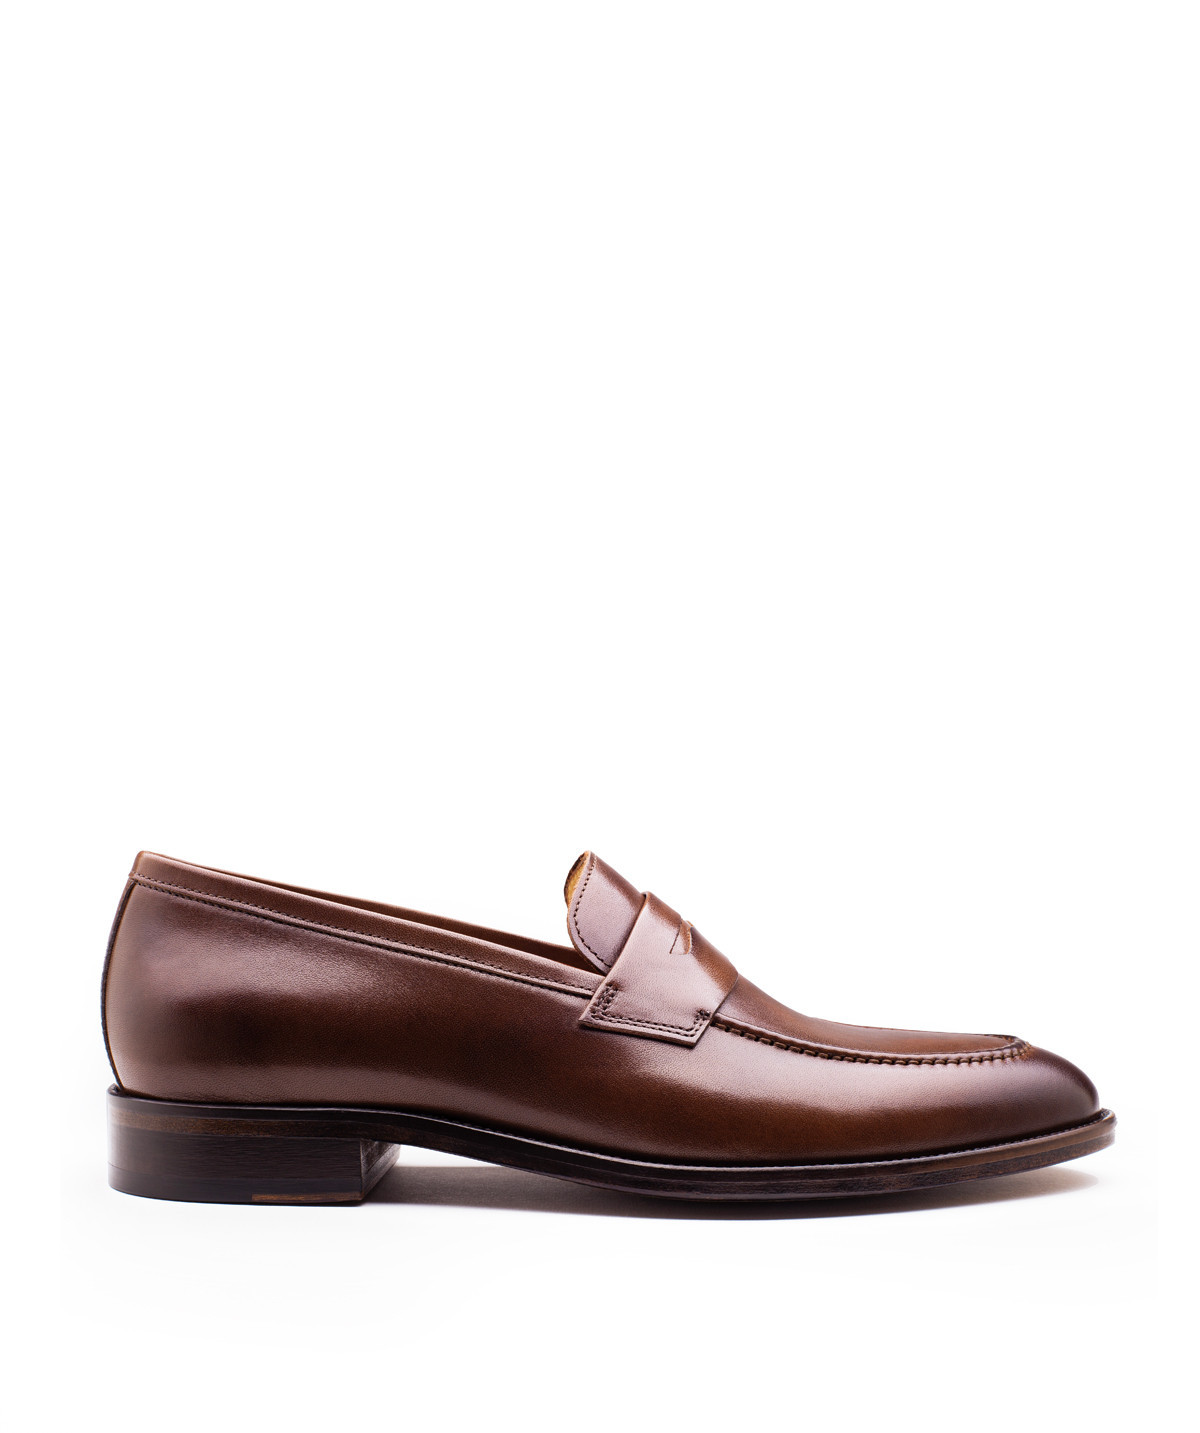 London Brown Men's Loafers - Finsbury Shoes